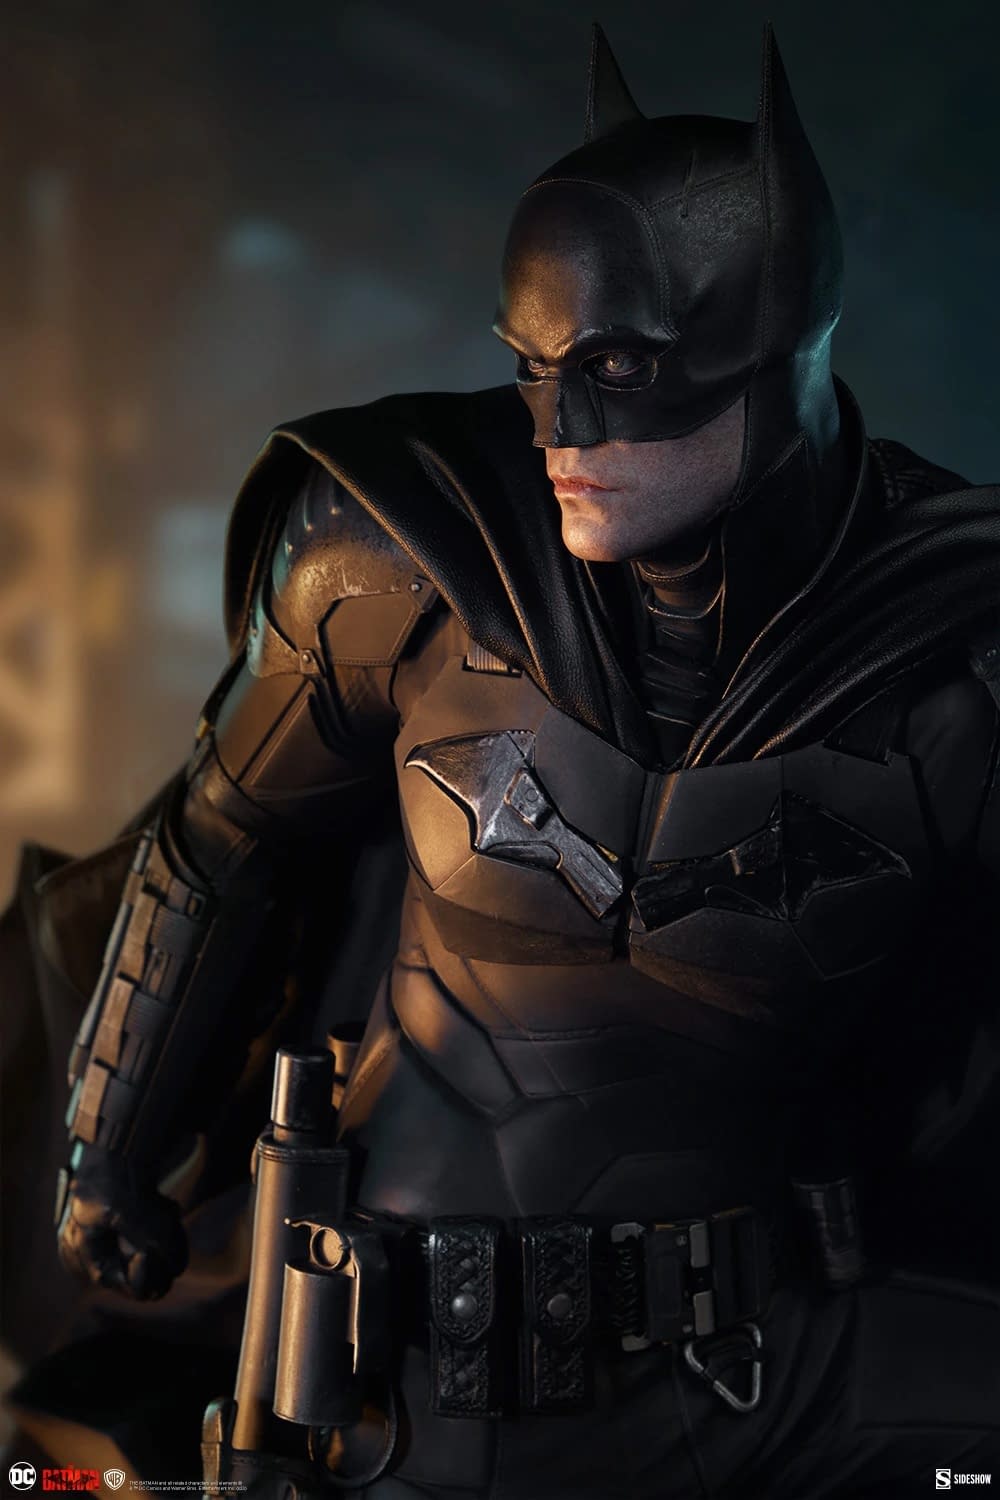 Revisit The Batman with Sideshow Collectibles Newest DC Statue